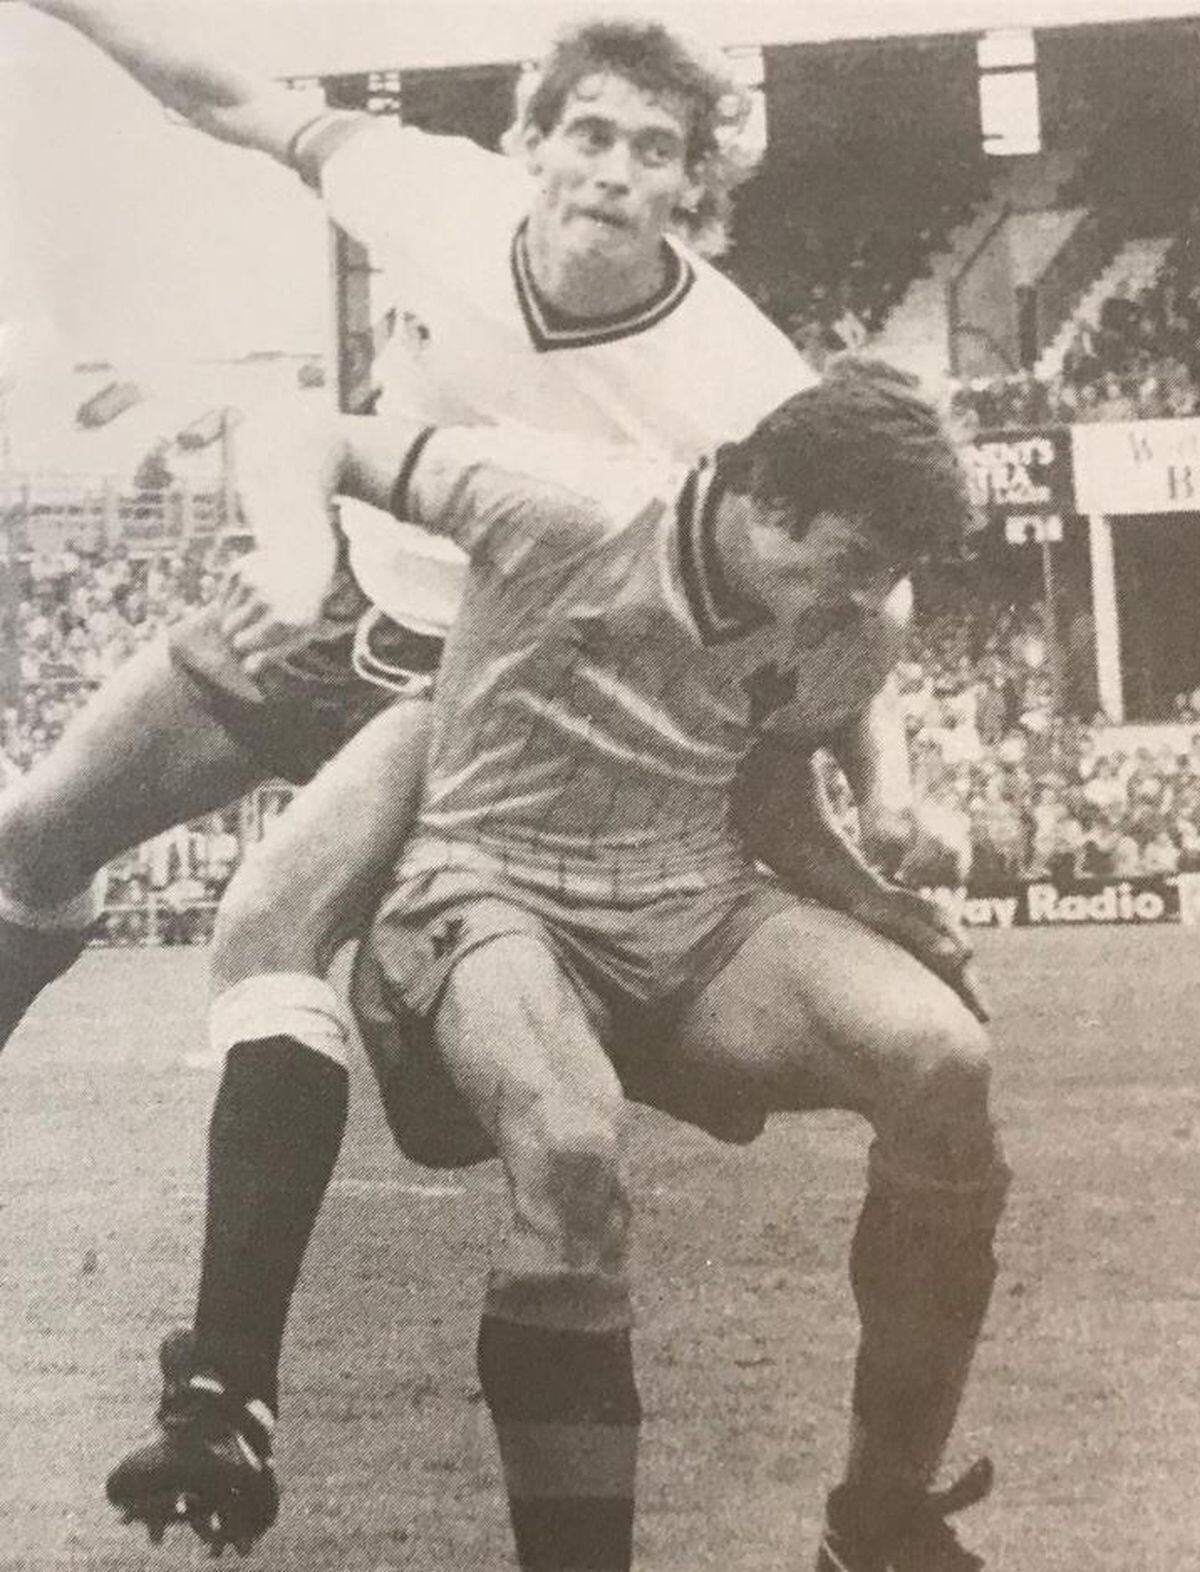 Up against Wolves defender Rob Hindmarch (who has since passed away)